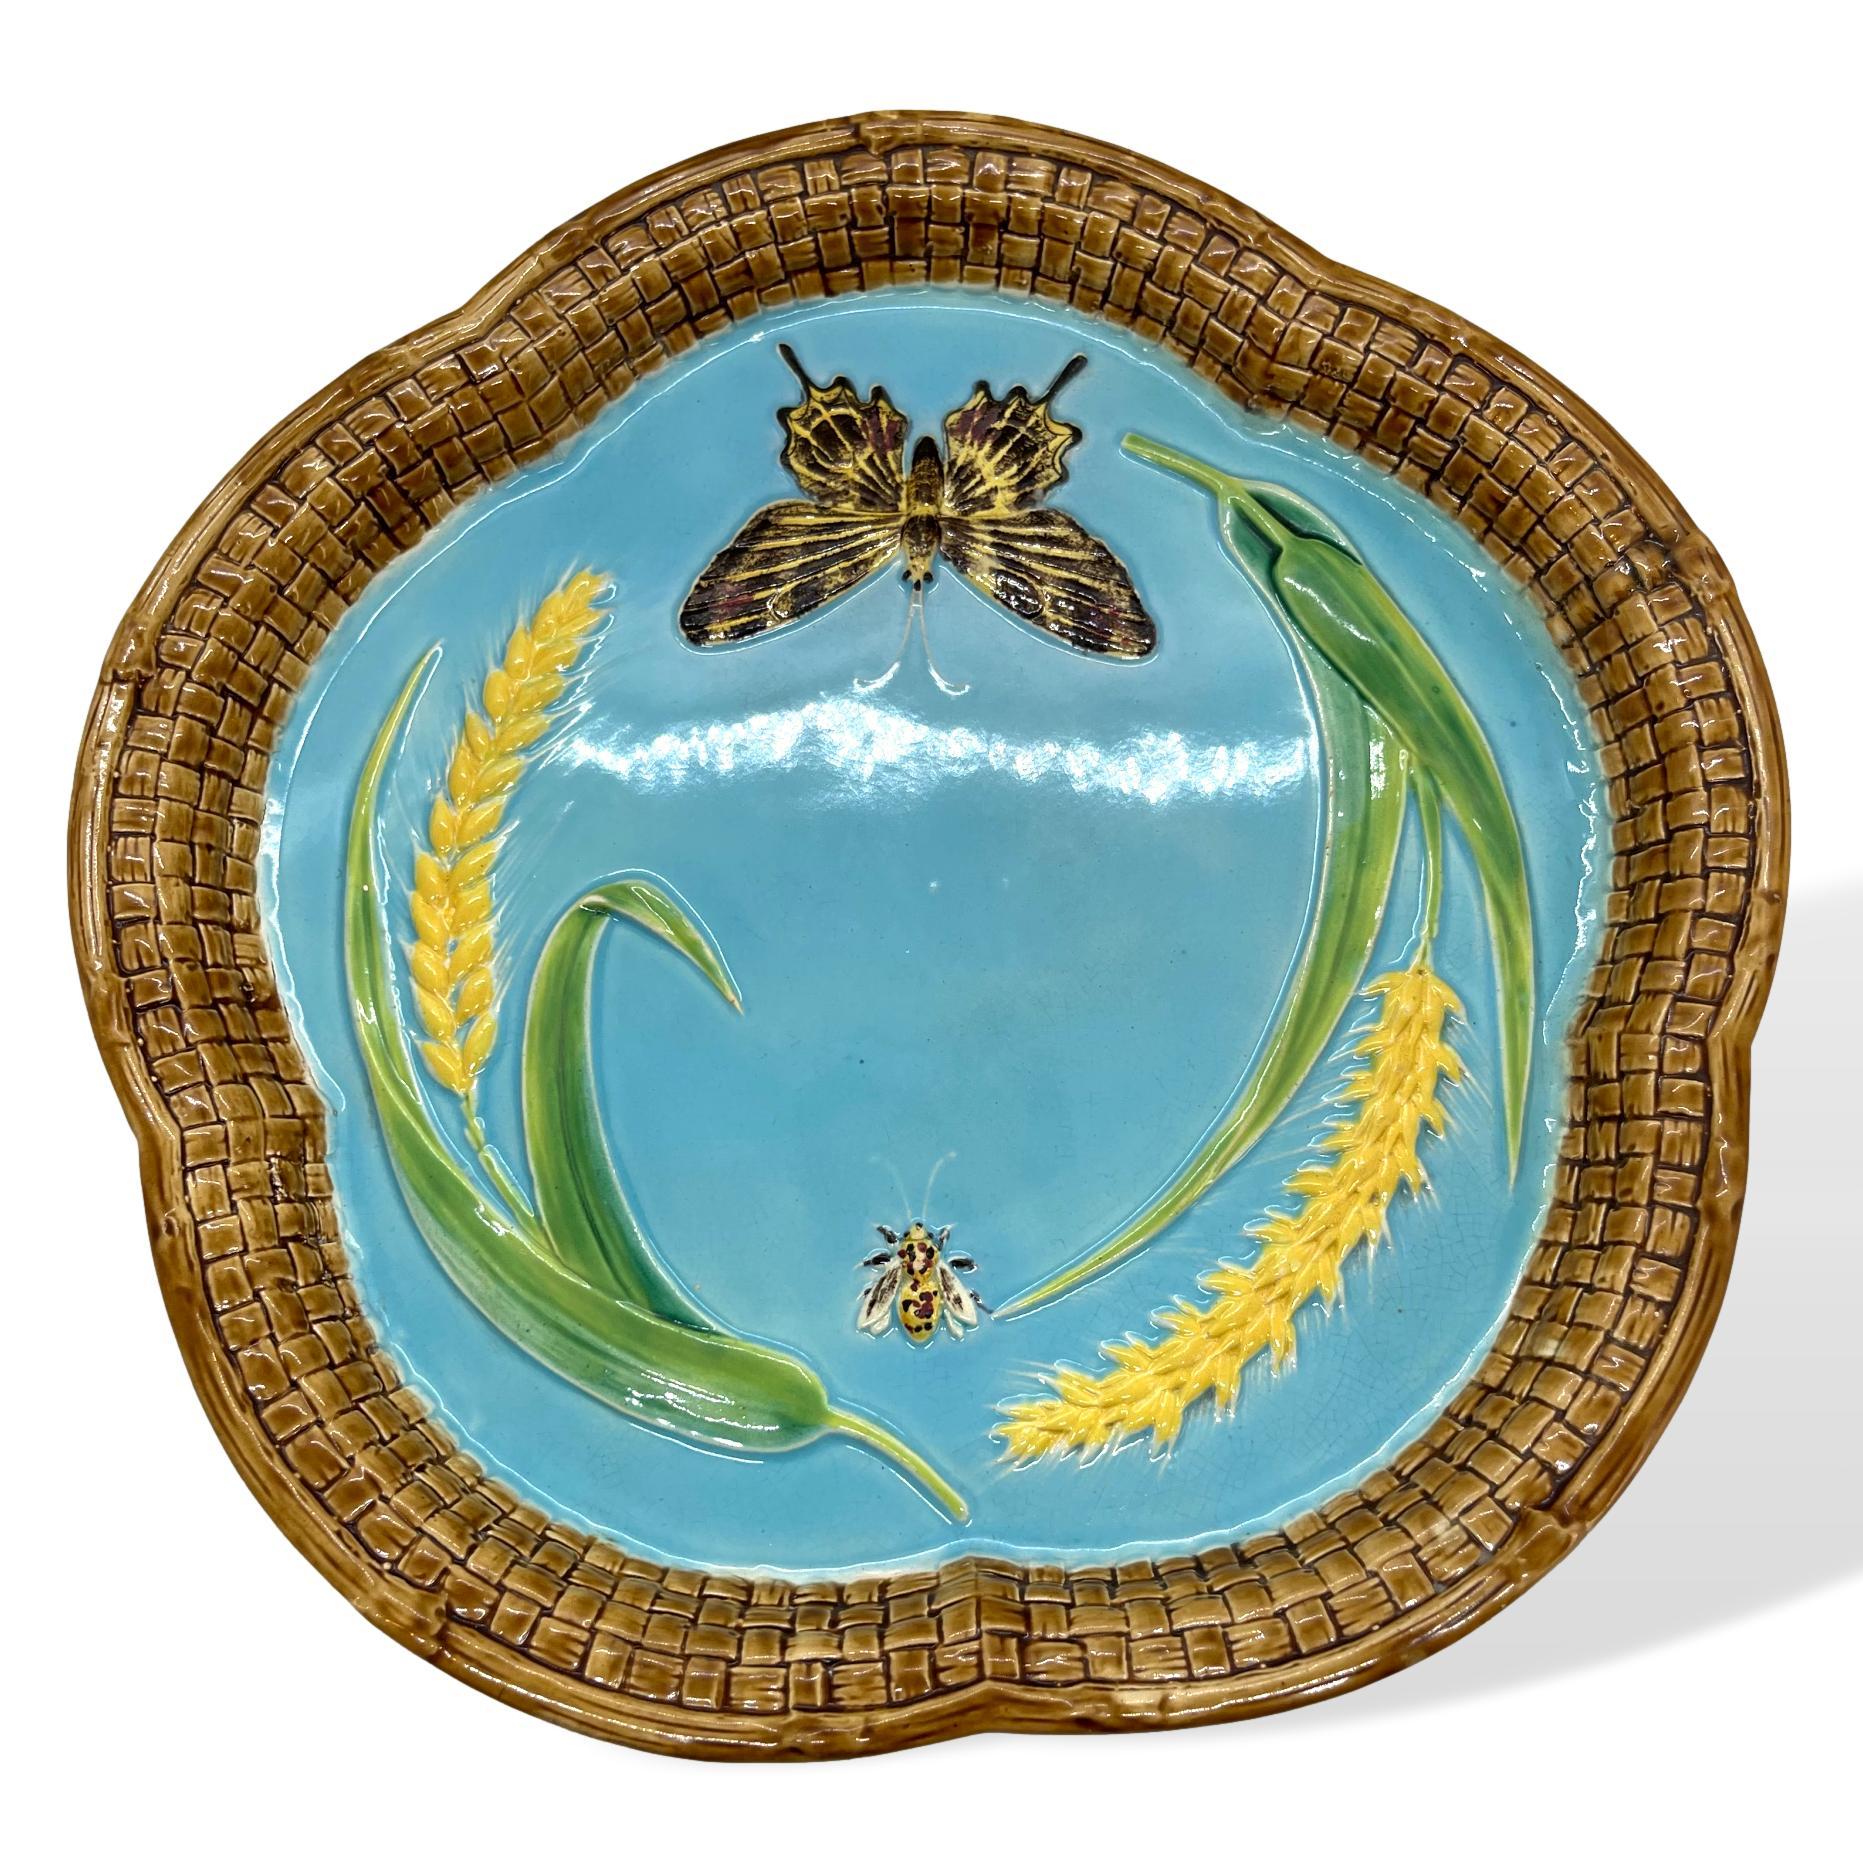 Impressed marks: 'GJ' monogram with crescent moon 'and Sons.' George Jones majolica date code 'C' for 1877 and painted design number '3477,' which corresponds to the entry 'Butterfly & Wheat Sheaf Bread Tray' in the George Jones Majolica Pattern